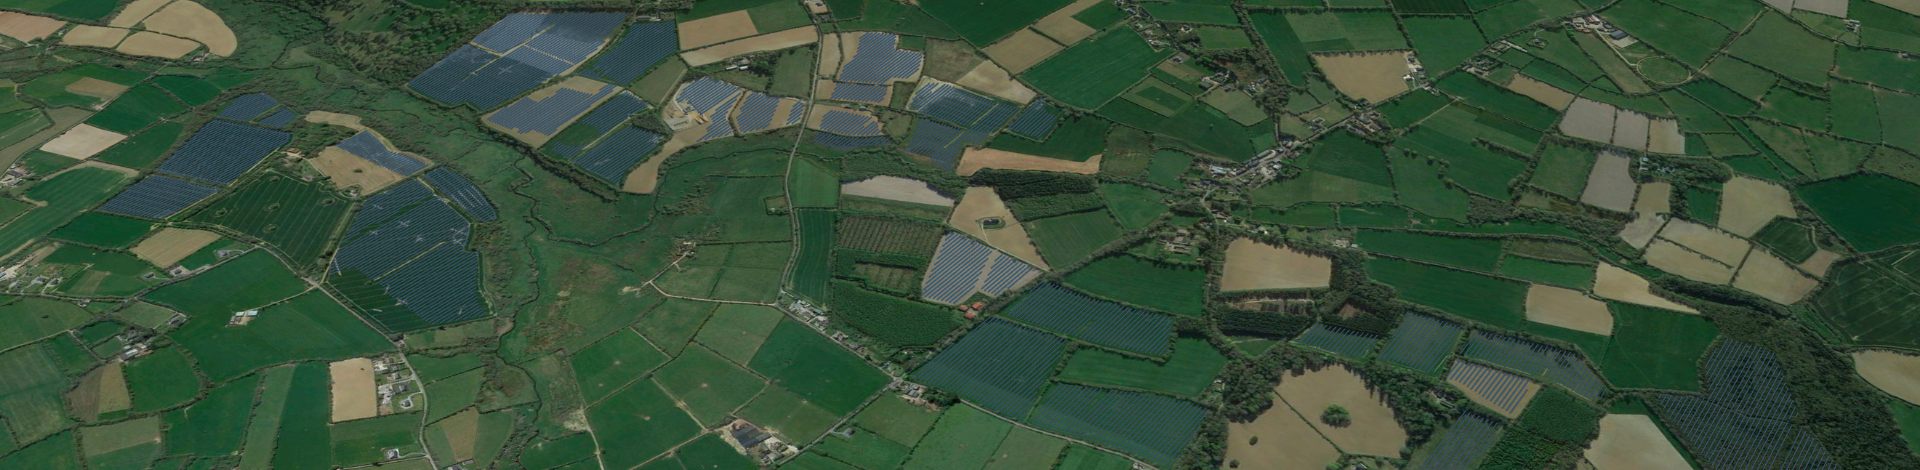 Aerial view of Rosspile Solar Farm